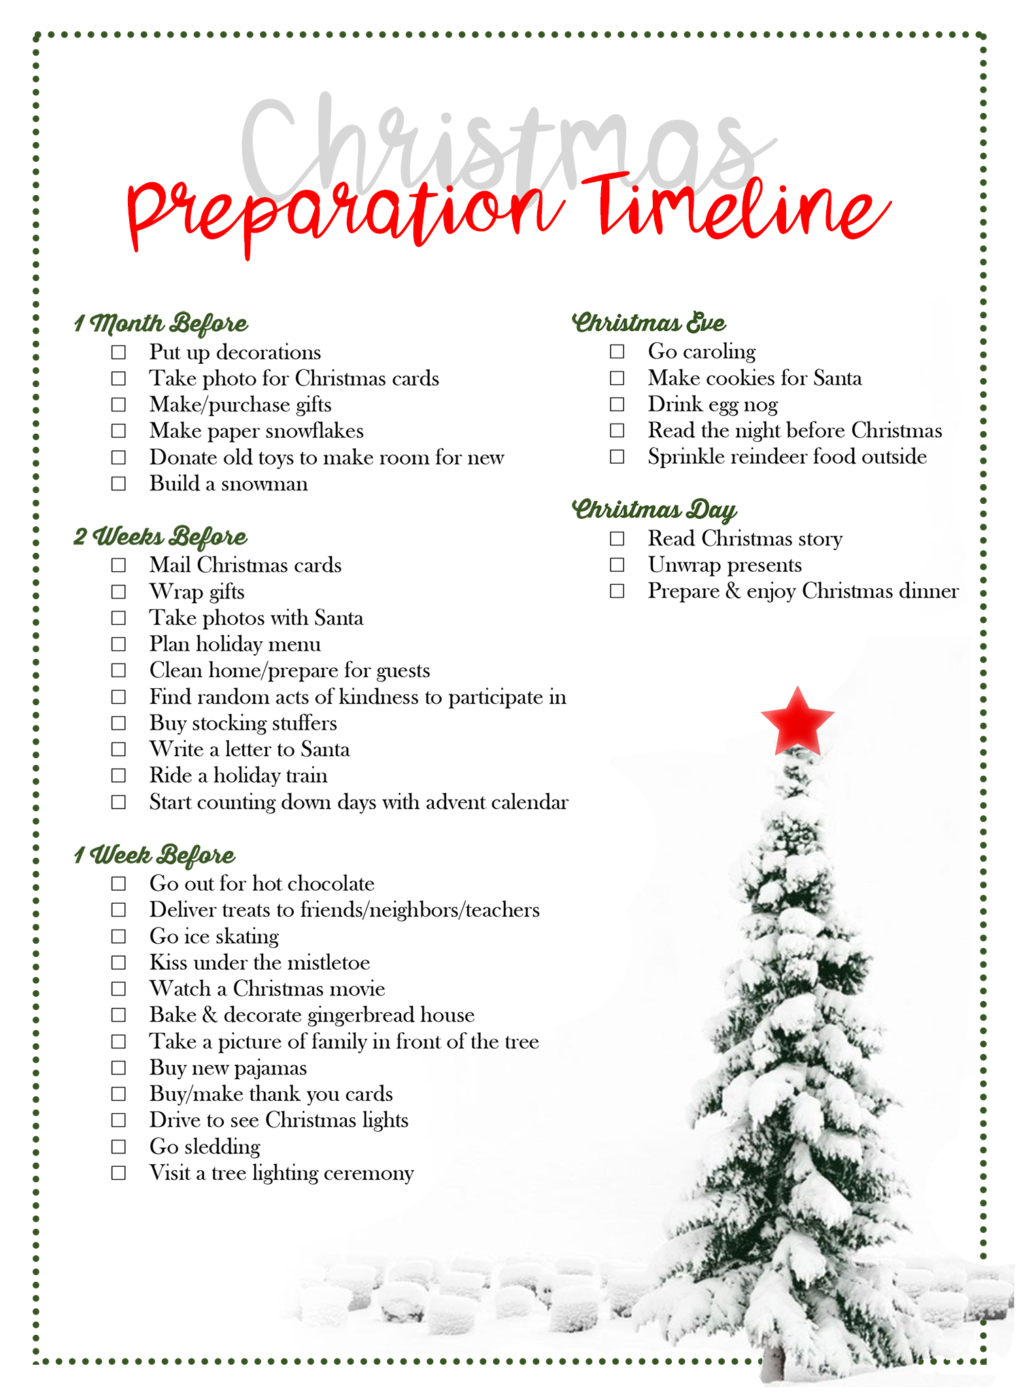 Christmas Preparation Timeline [by Laurel Smith] The DIY Lighthouse